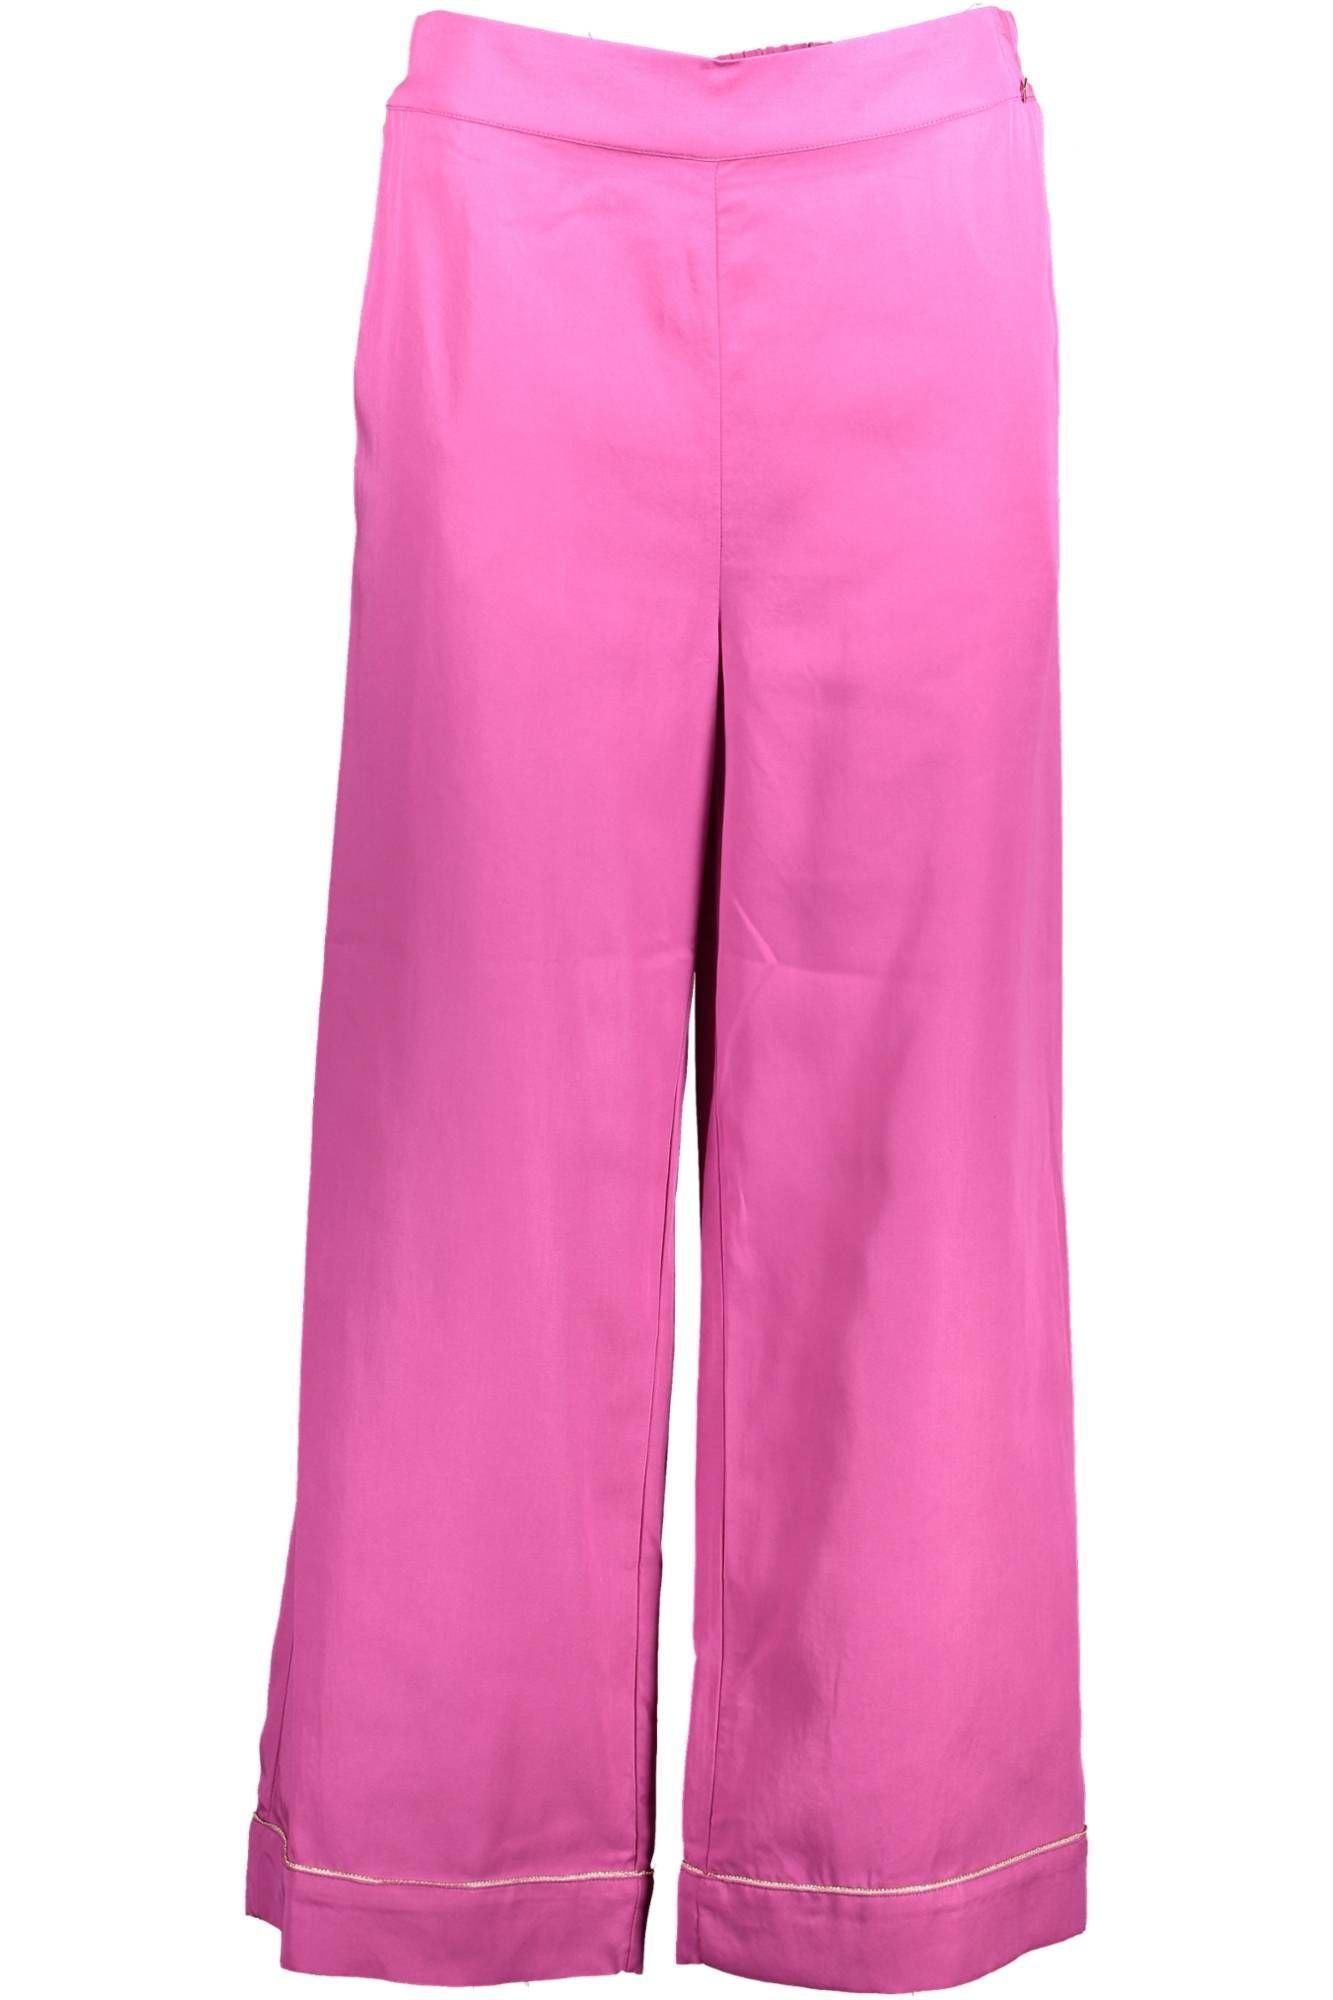 Chic Pink Trousers with Elastic Waistband